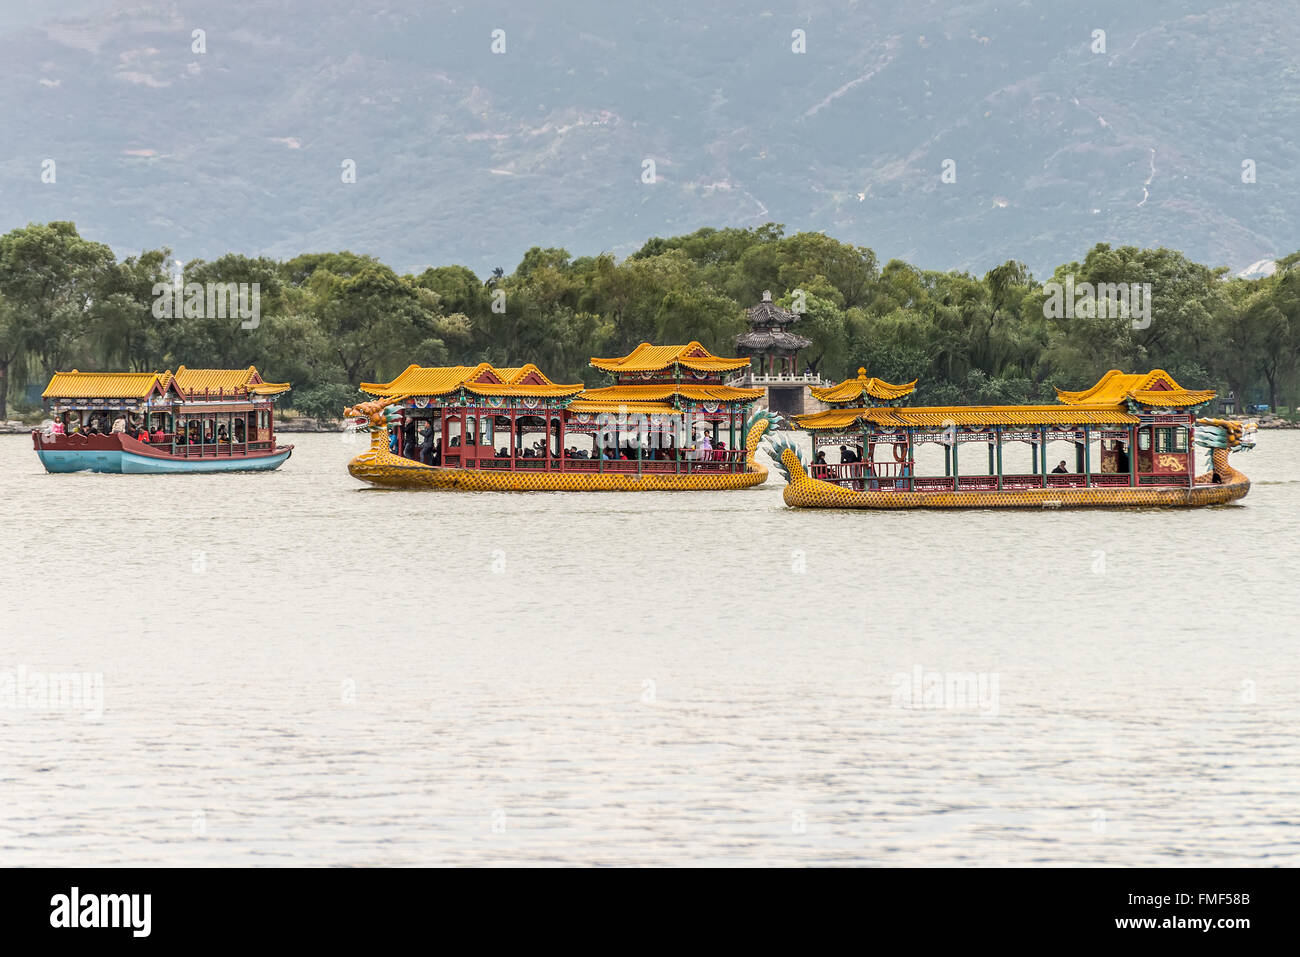 People enjoy a dragon boat traveling on the Kunming Lake, Beijing, China on a smoggy day. Stock Photo